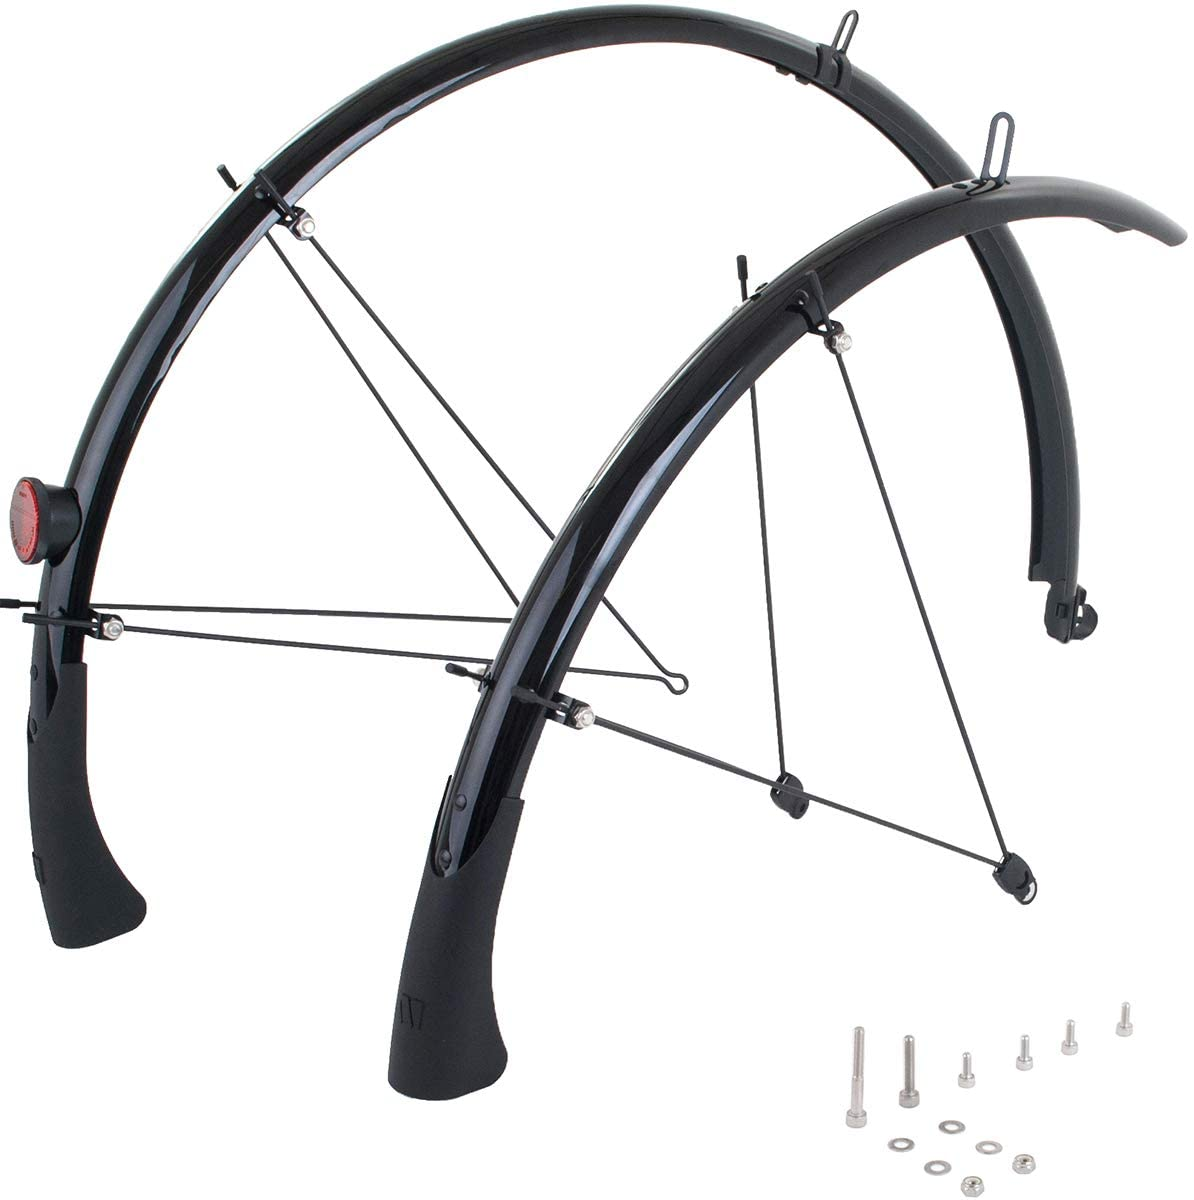 Full-length mudguards like these offer maximum protection and protect neighboring riders from mud spray. 